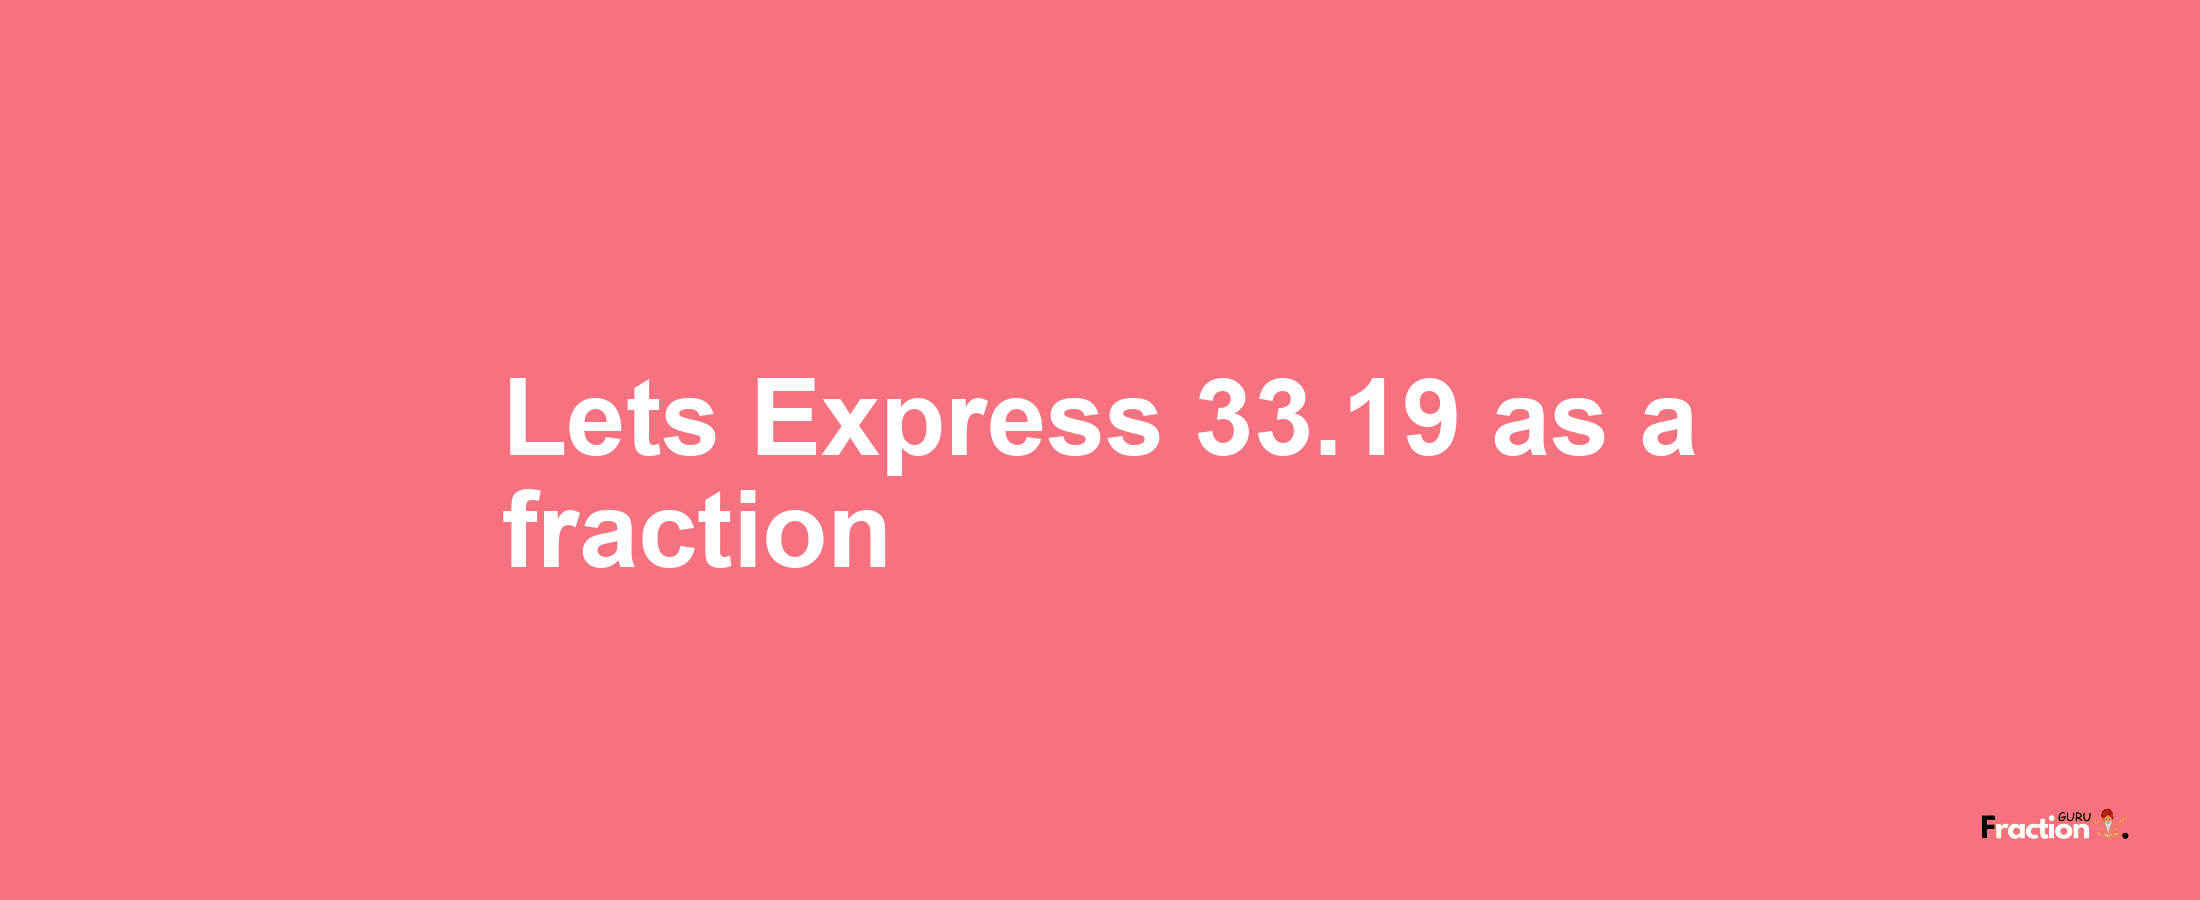 Lets Express 33.19 as afraction